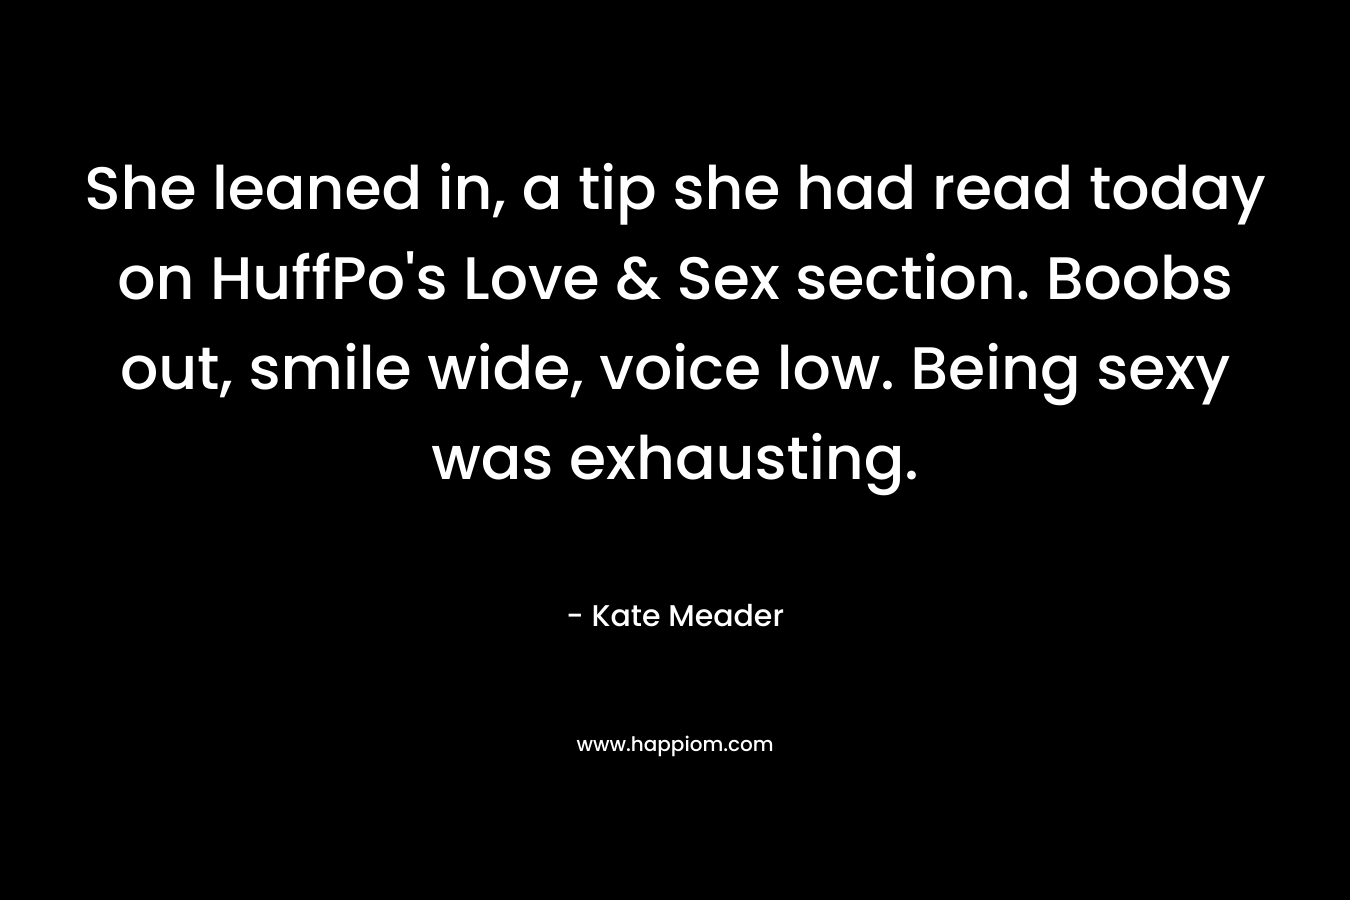 She leaned in, a tip she had read today on HuffPo’s Love & Sex section. Boobs out, smile wide, voice low. Being sexy was exhausting. – Kate Meader